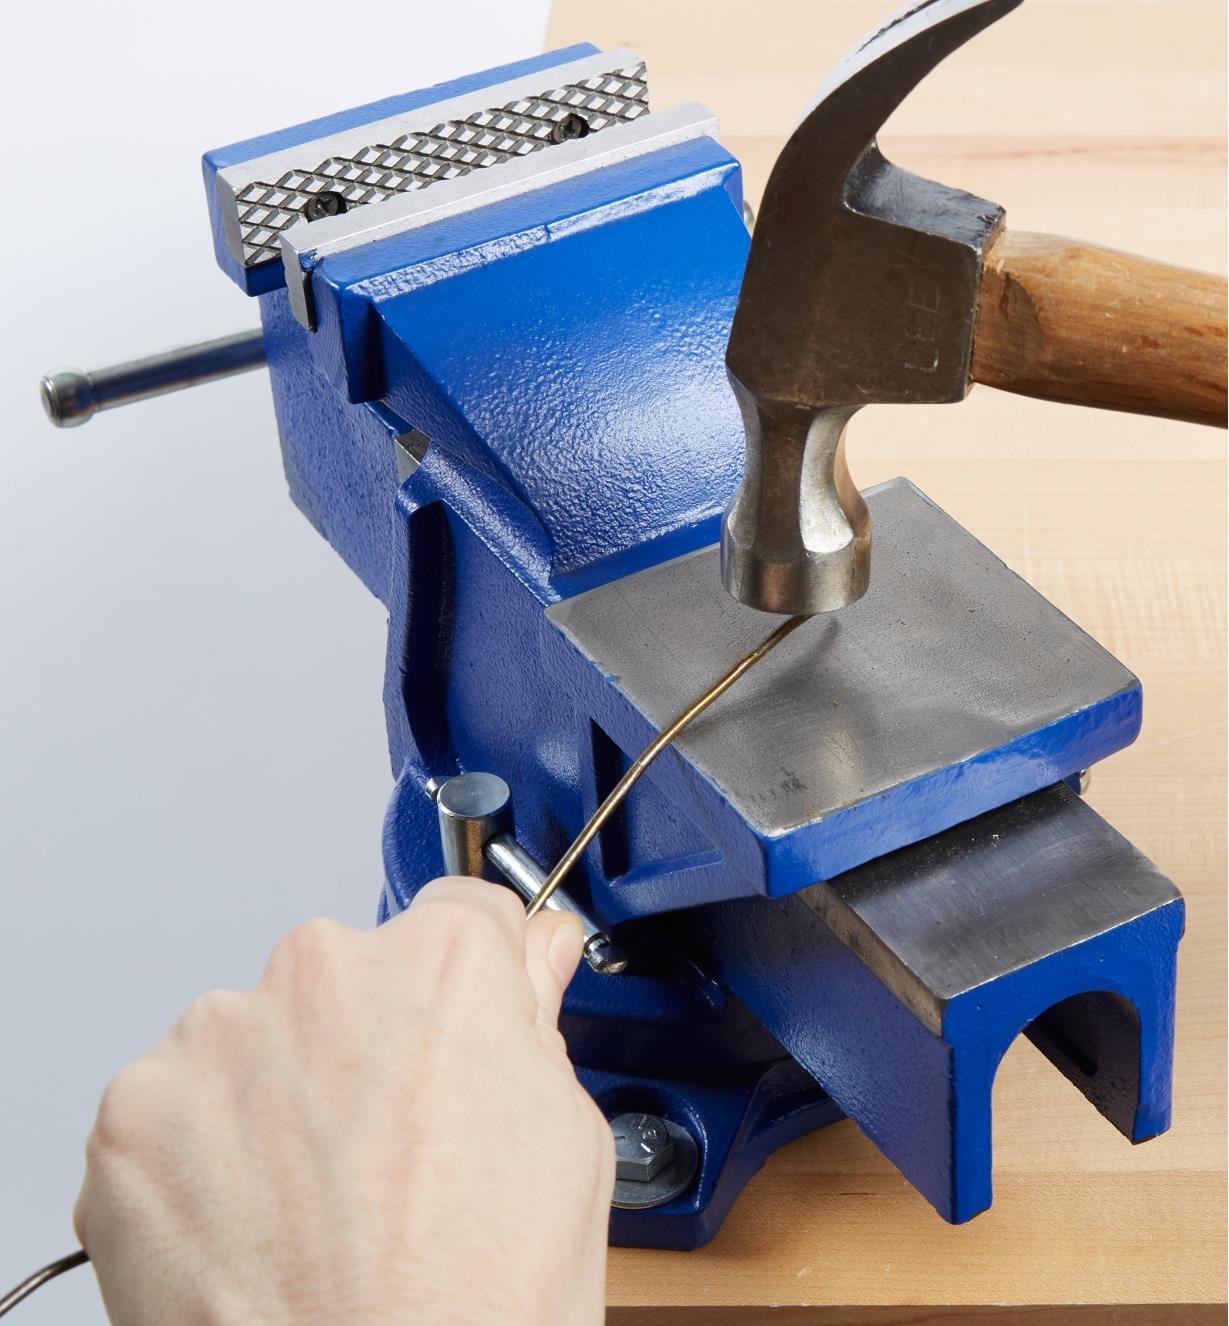 Bending a wire using a hammer against the anvil on the heavy-duty vise